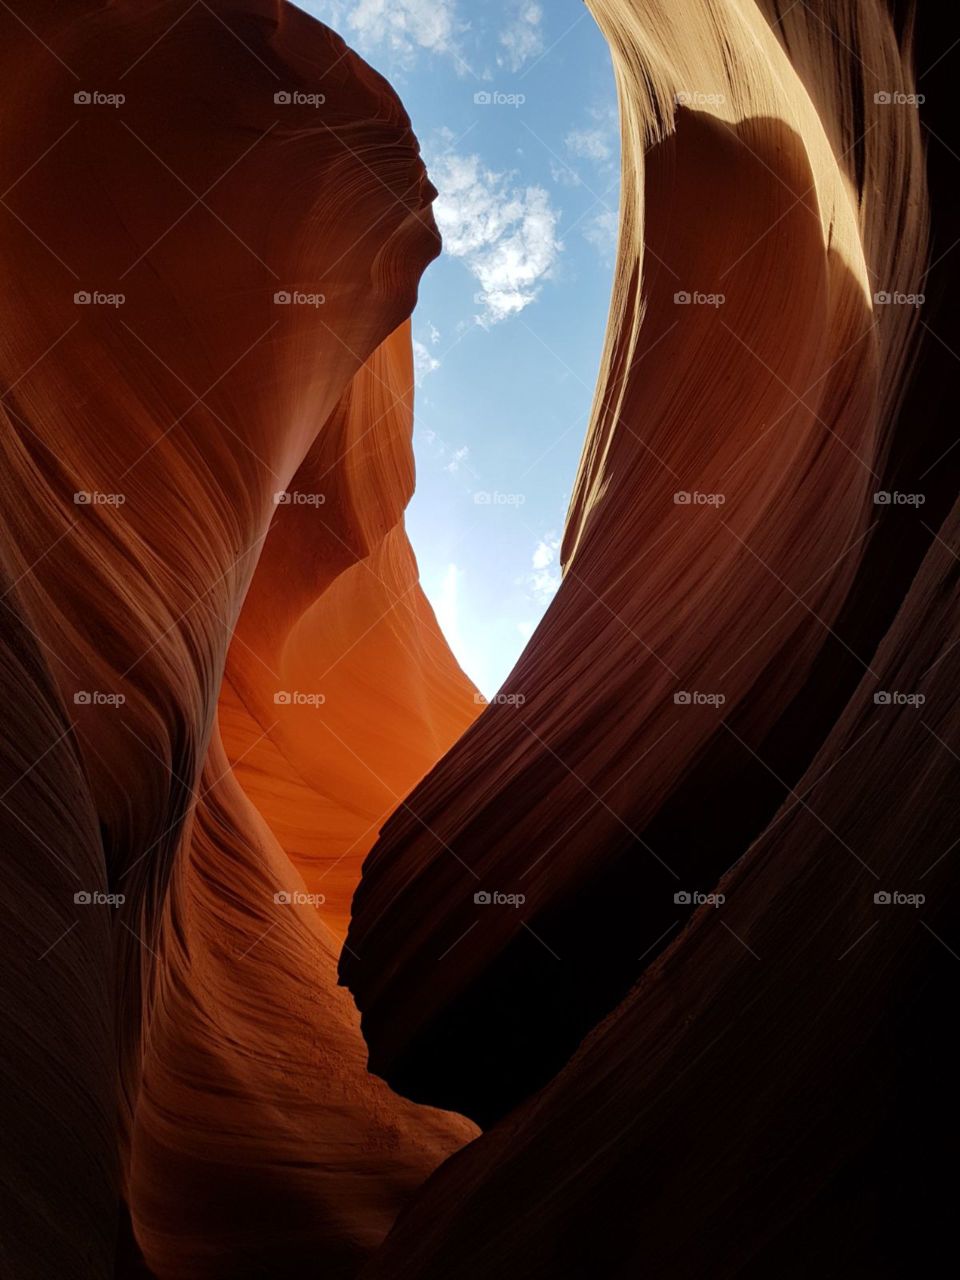 Shoot in Antelope Canyon, unbelievable, the daylight is perfect and the curves of this canyon are amazing.